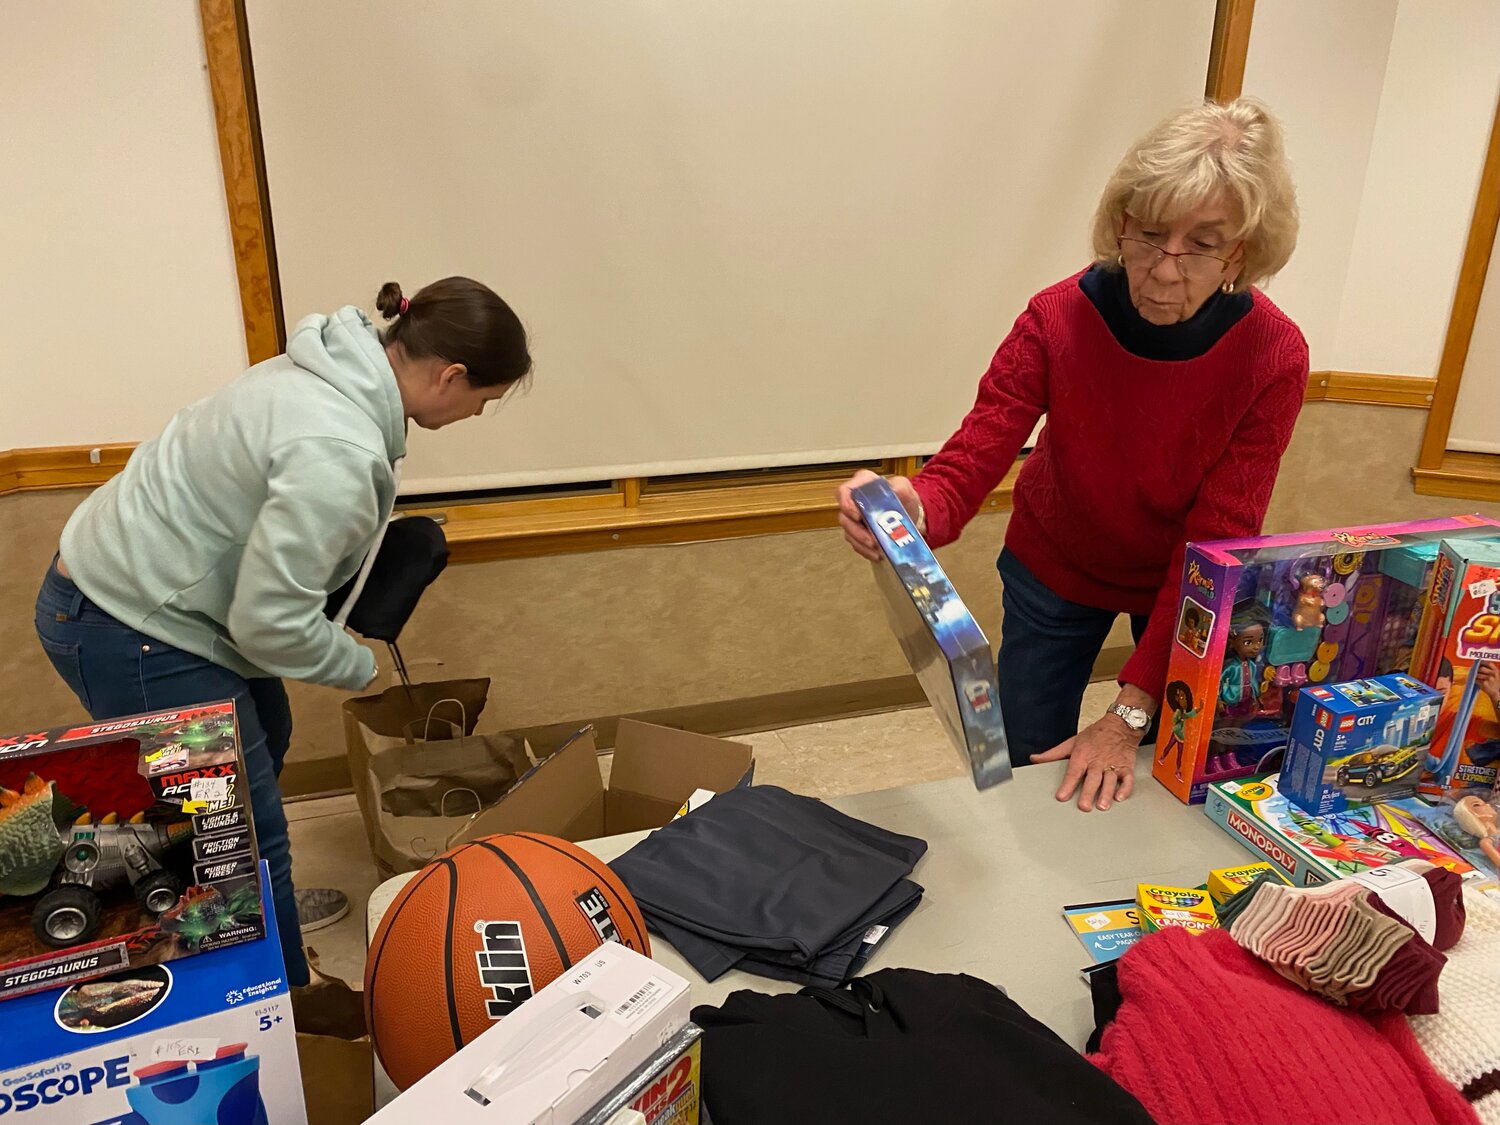 While the Monticello Fire Department Holiday Gift Drive is a yearly event, this season brought on an early start to the toy drive. Chris Kilgore, left, and Carol MacAdam meticulously organize and package the donated gifts intended for local children this holiday.